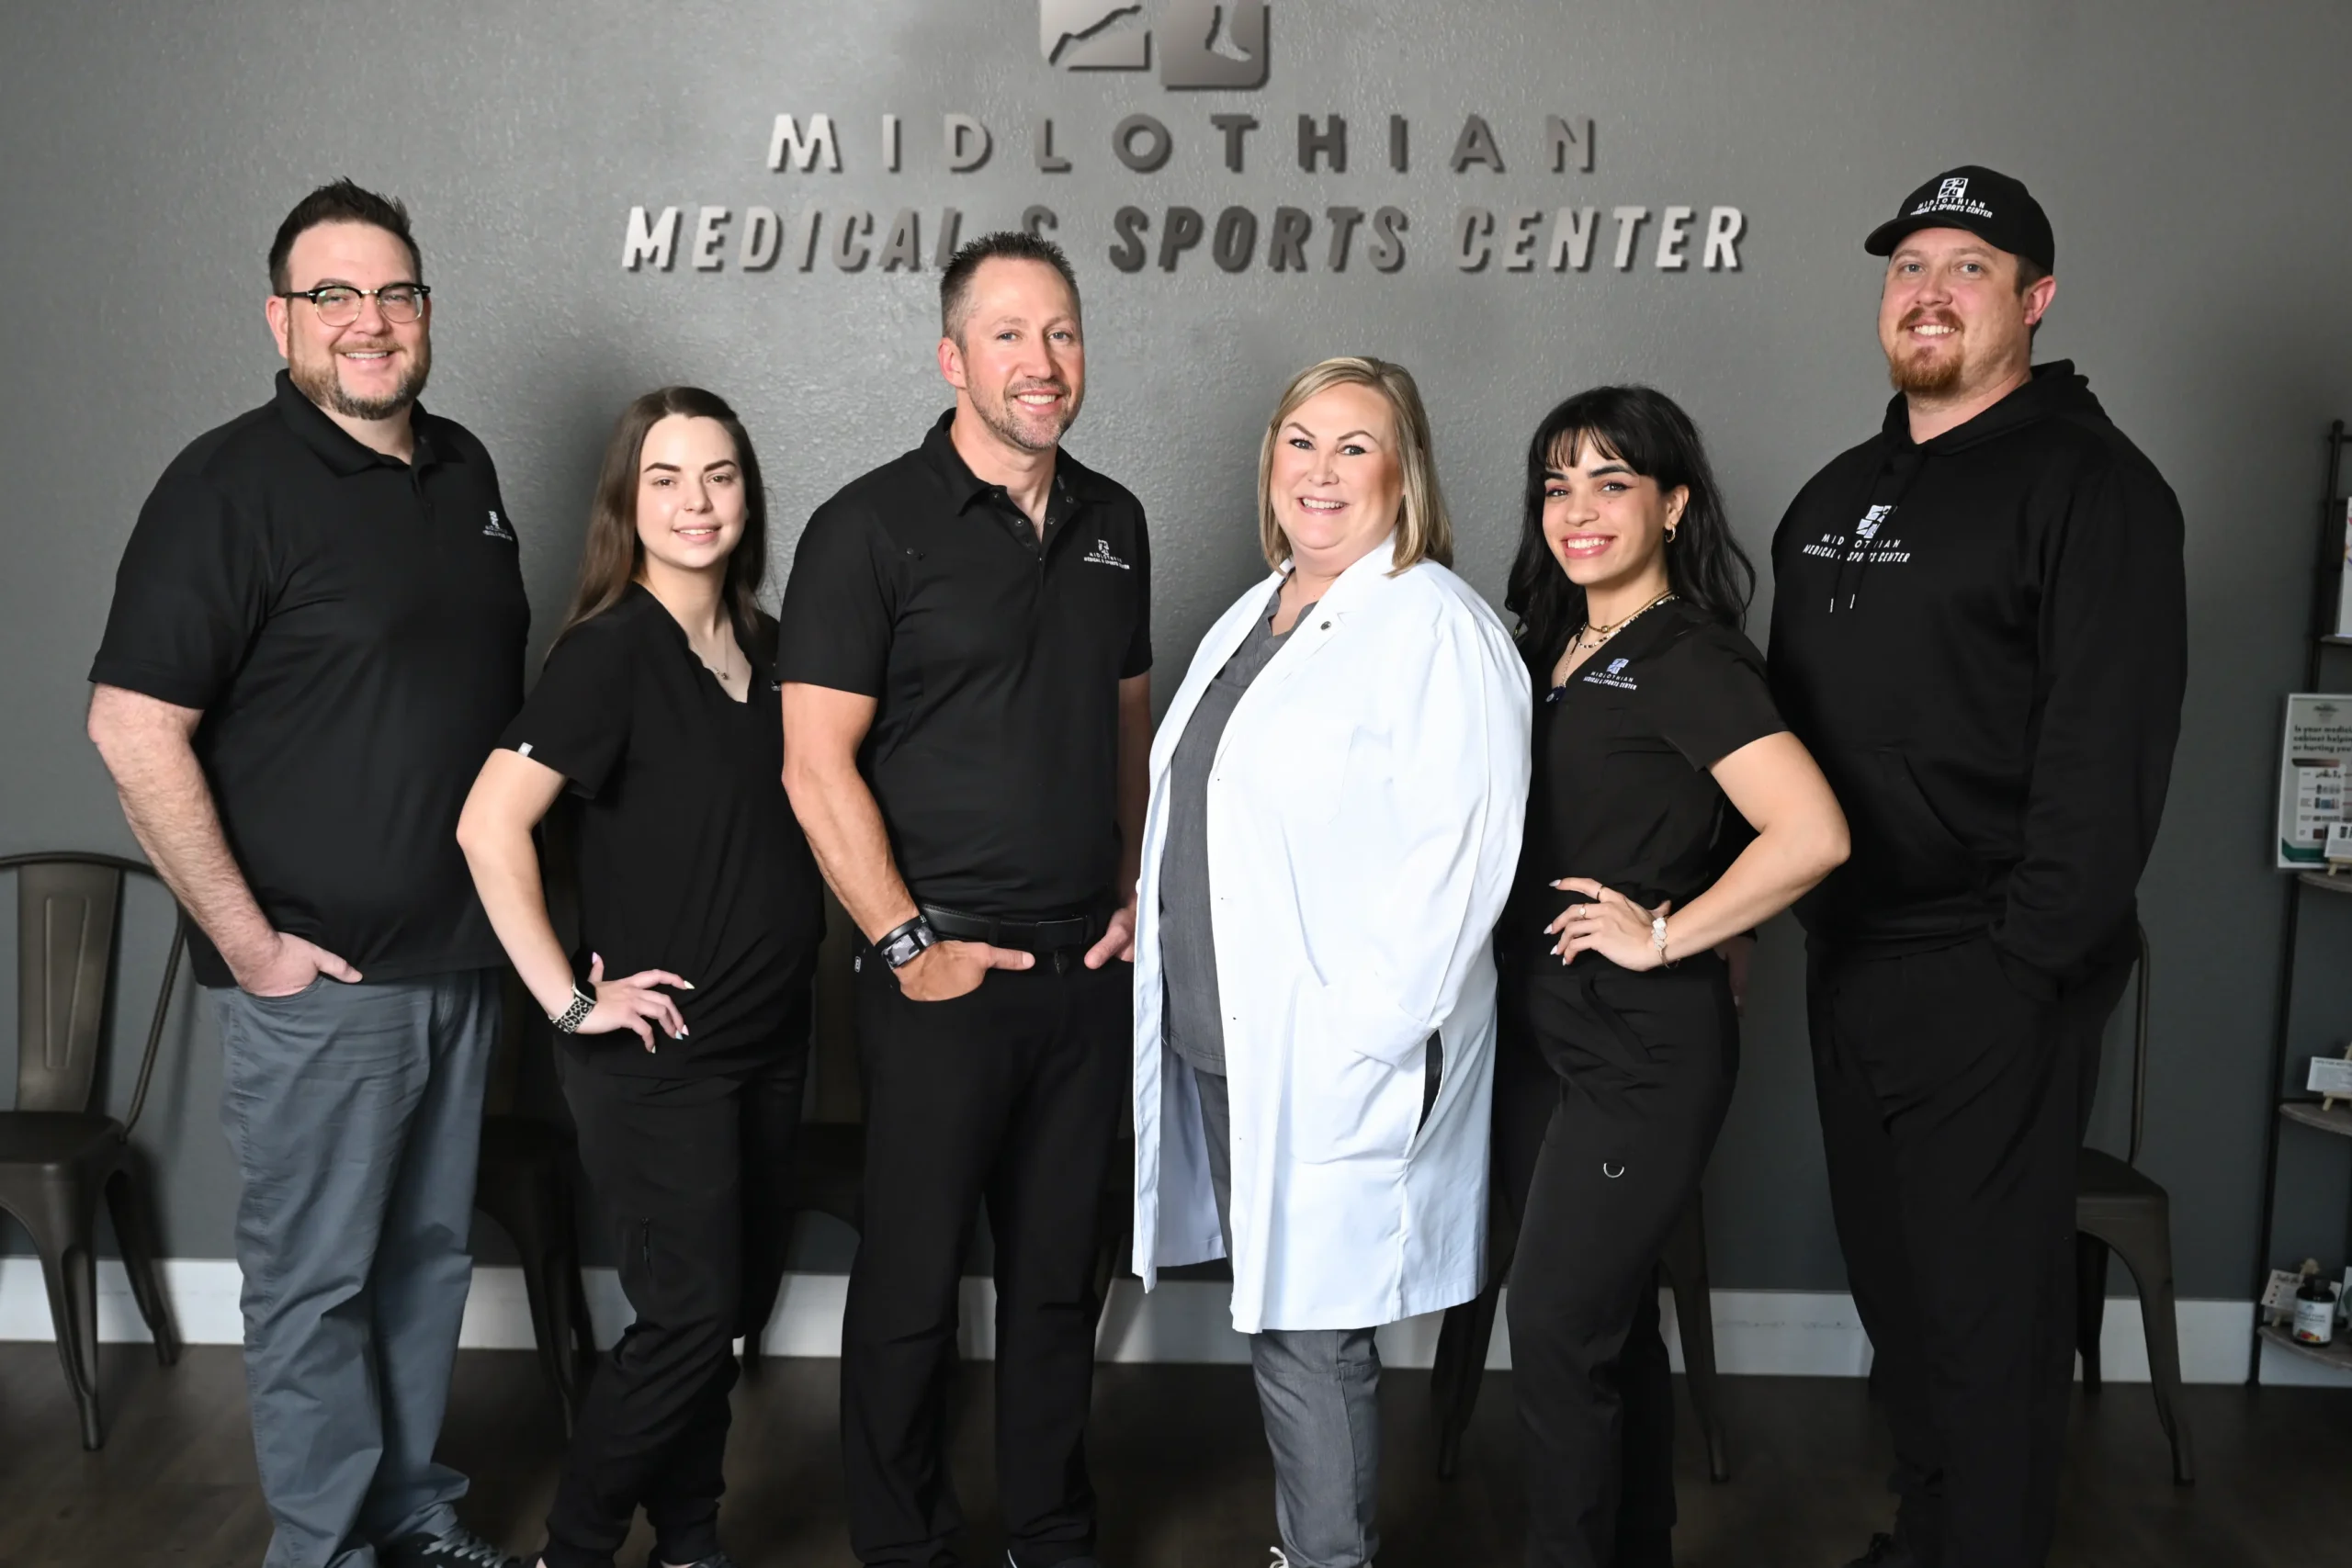 Midlothian Medical and Sports Center,